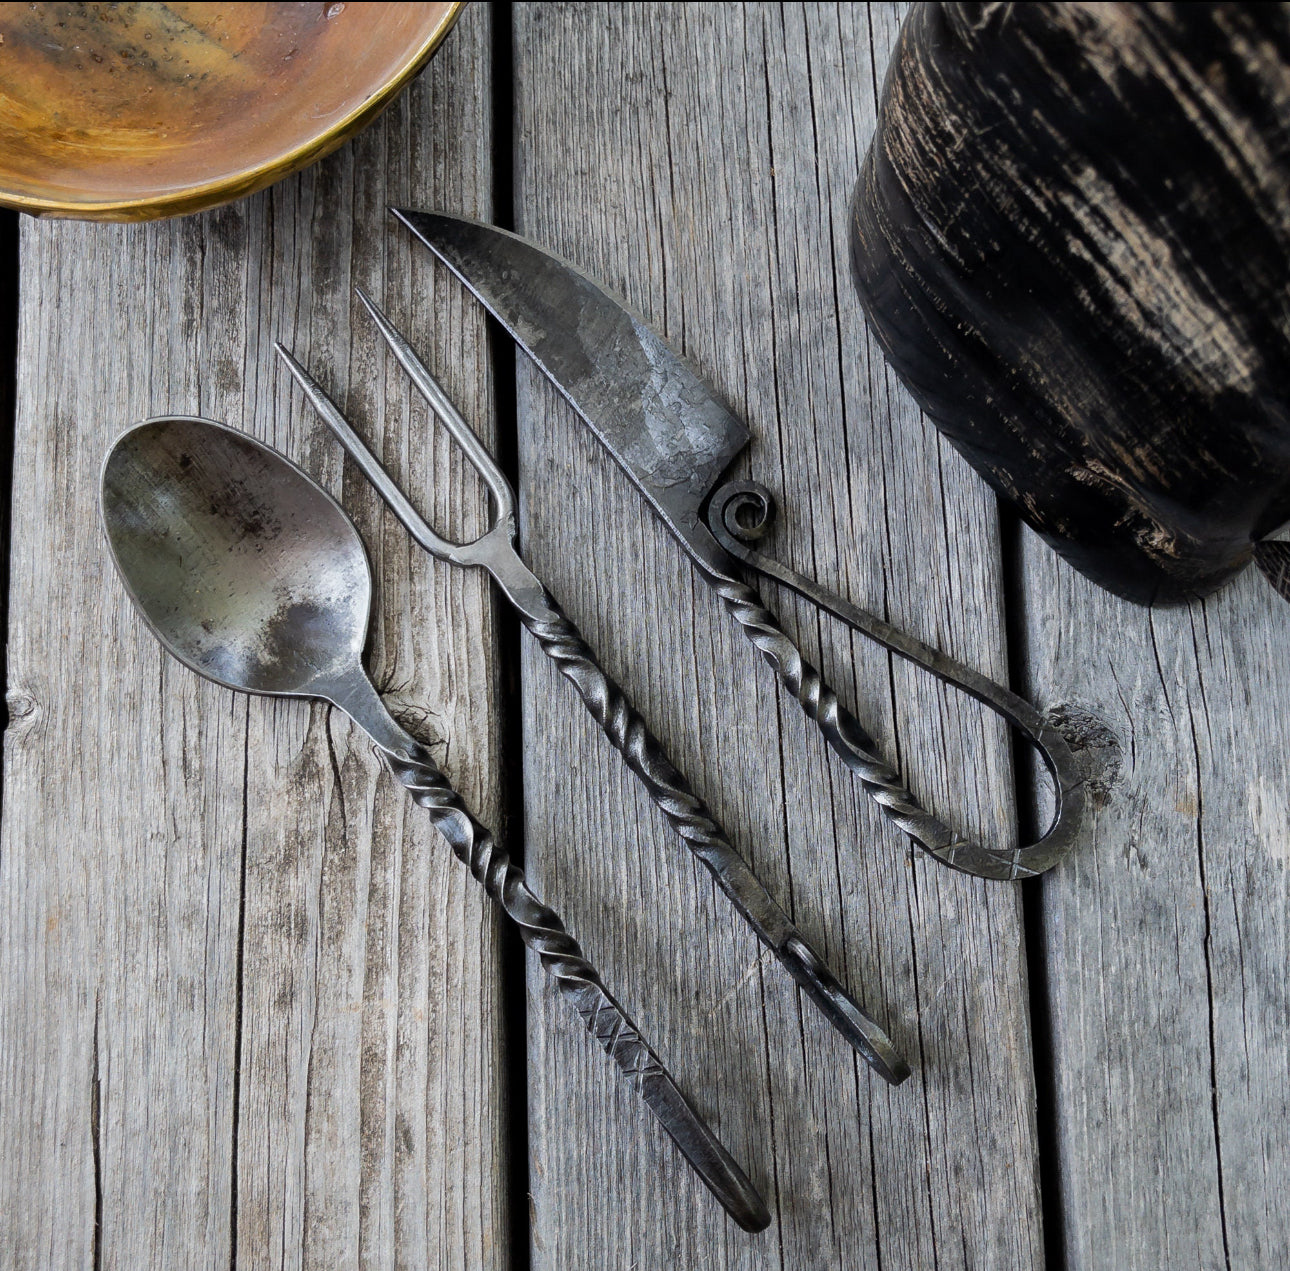 Fireside Feast 3PC Iron Silverware Set - Medieval Inspired Natural Iron Fork, Spoon, and Knife Cutlery Set for Camping & Reenactment